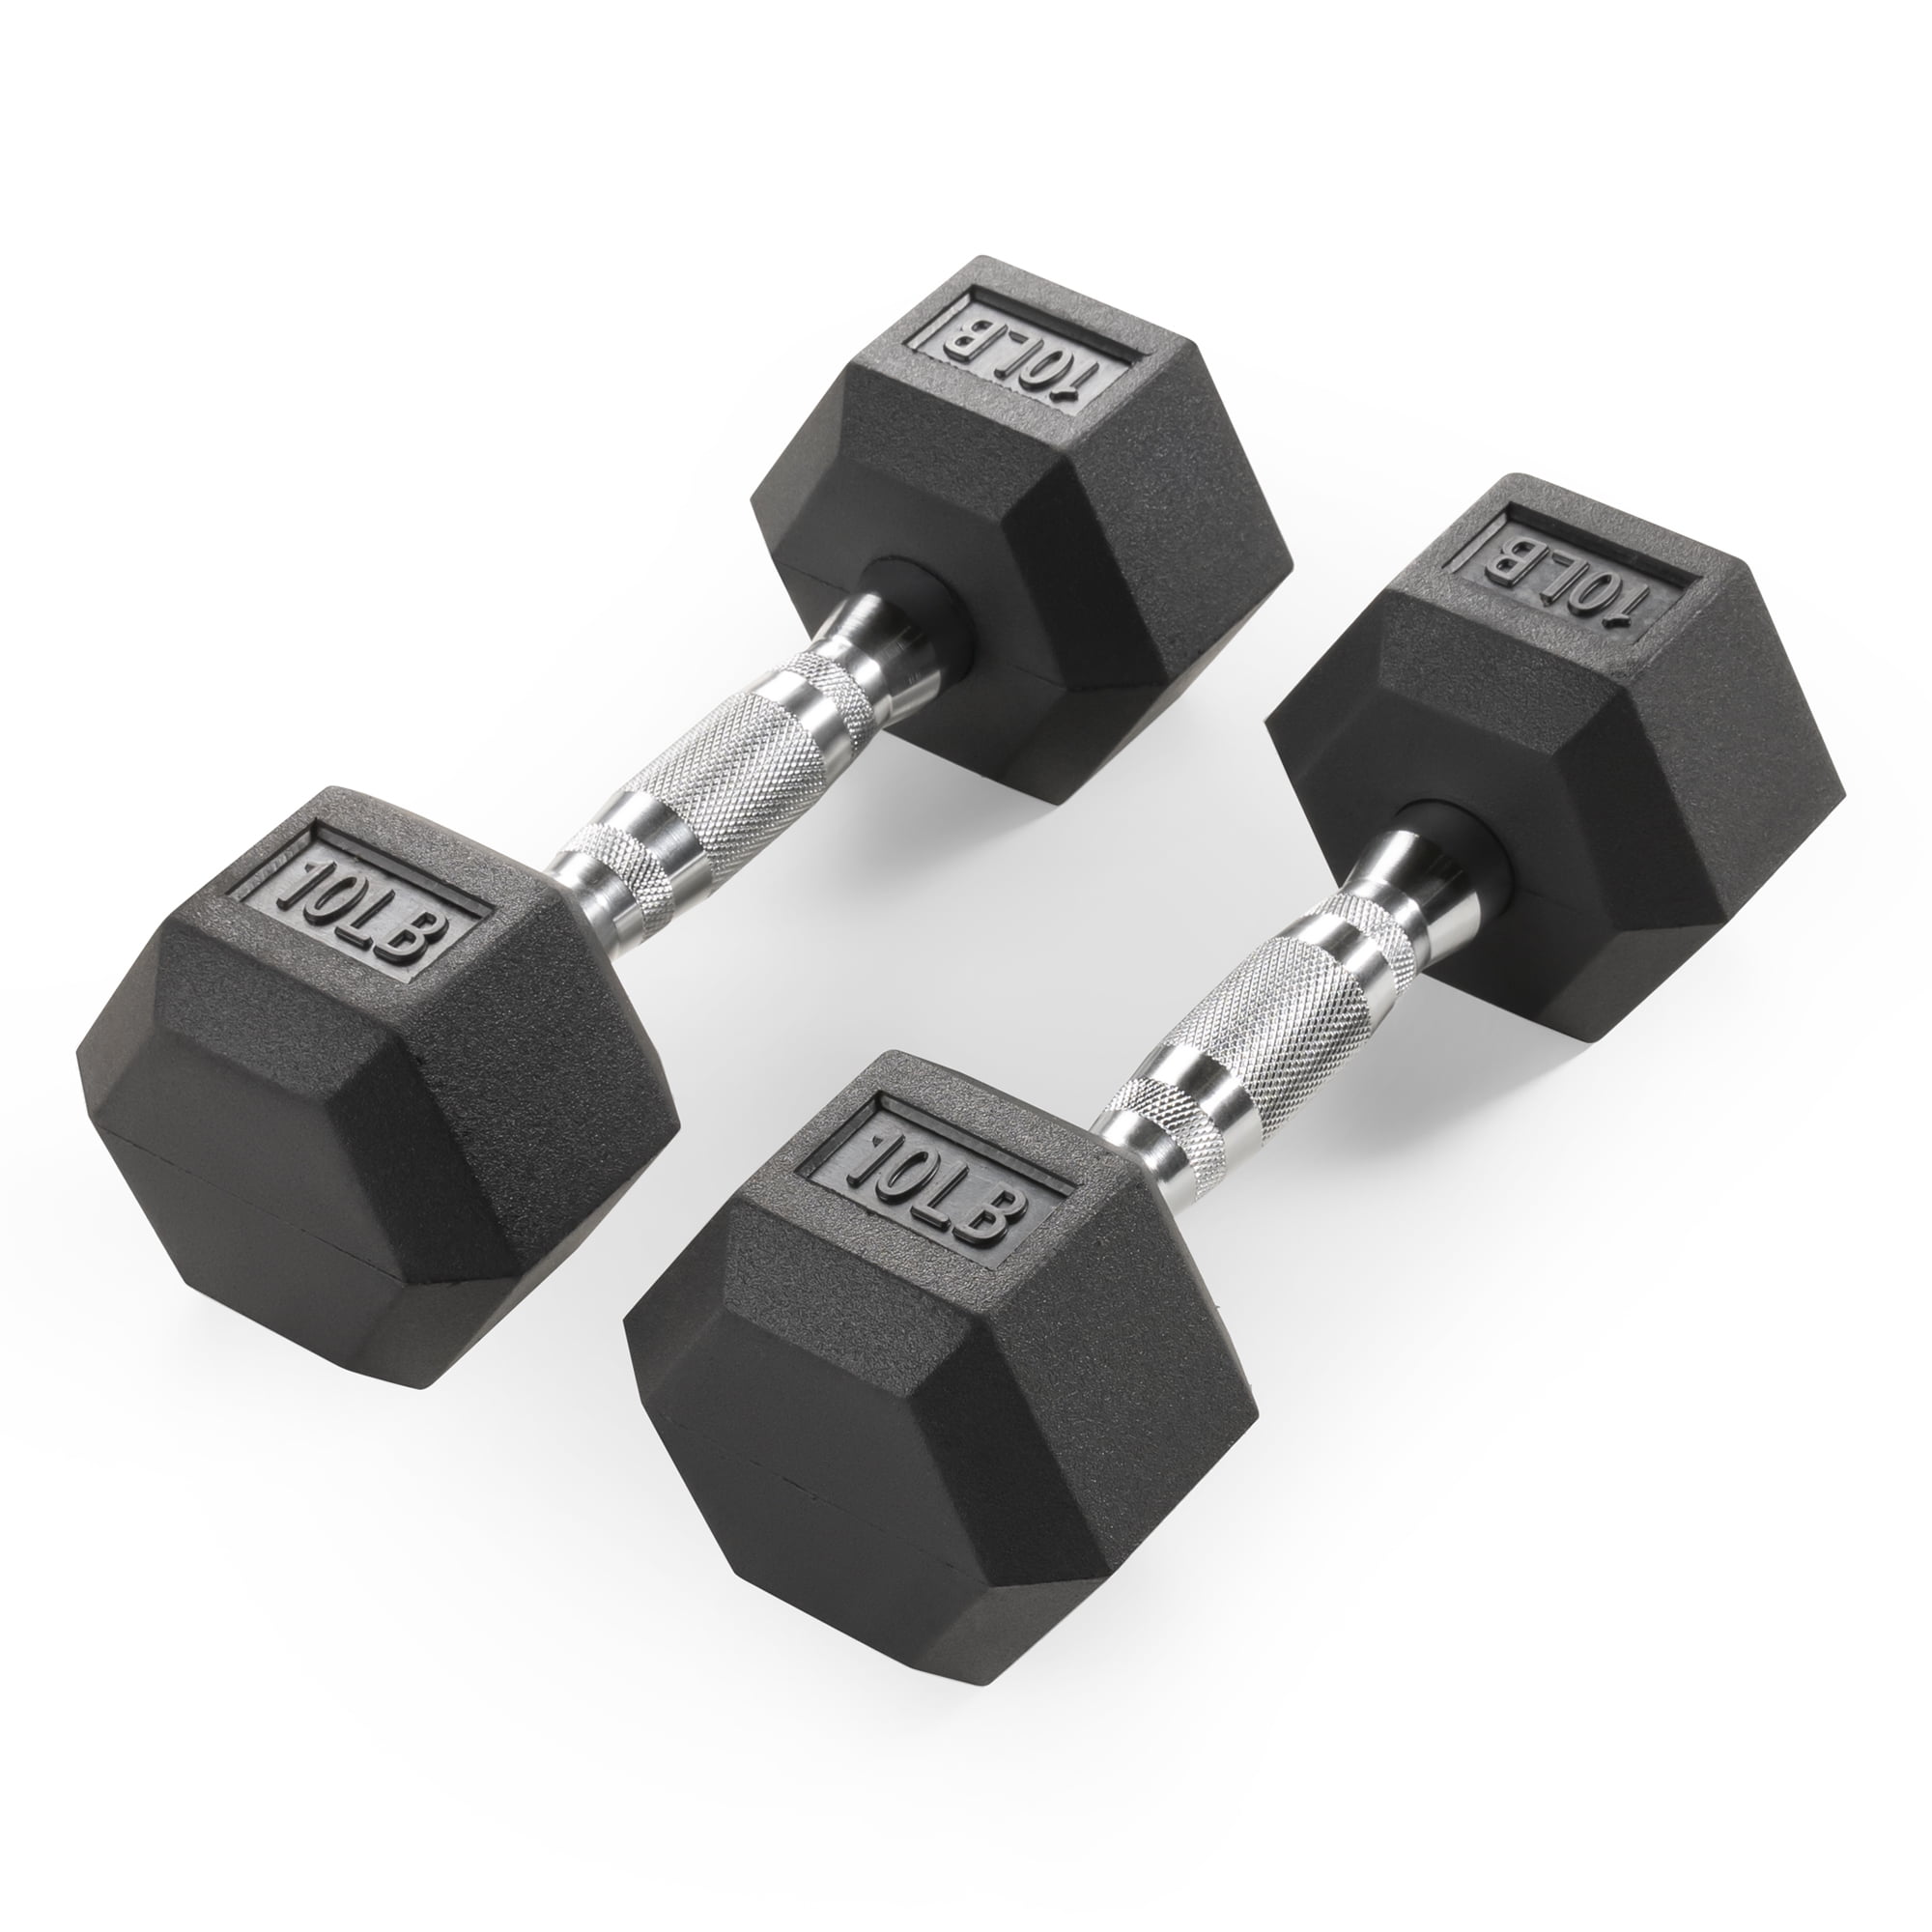 20LBS Total Brand New Weider 10LB Rubber Hex Dumbbell Pair Ships Free! 